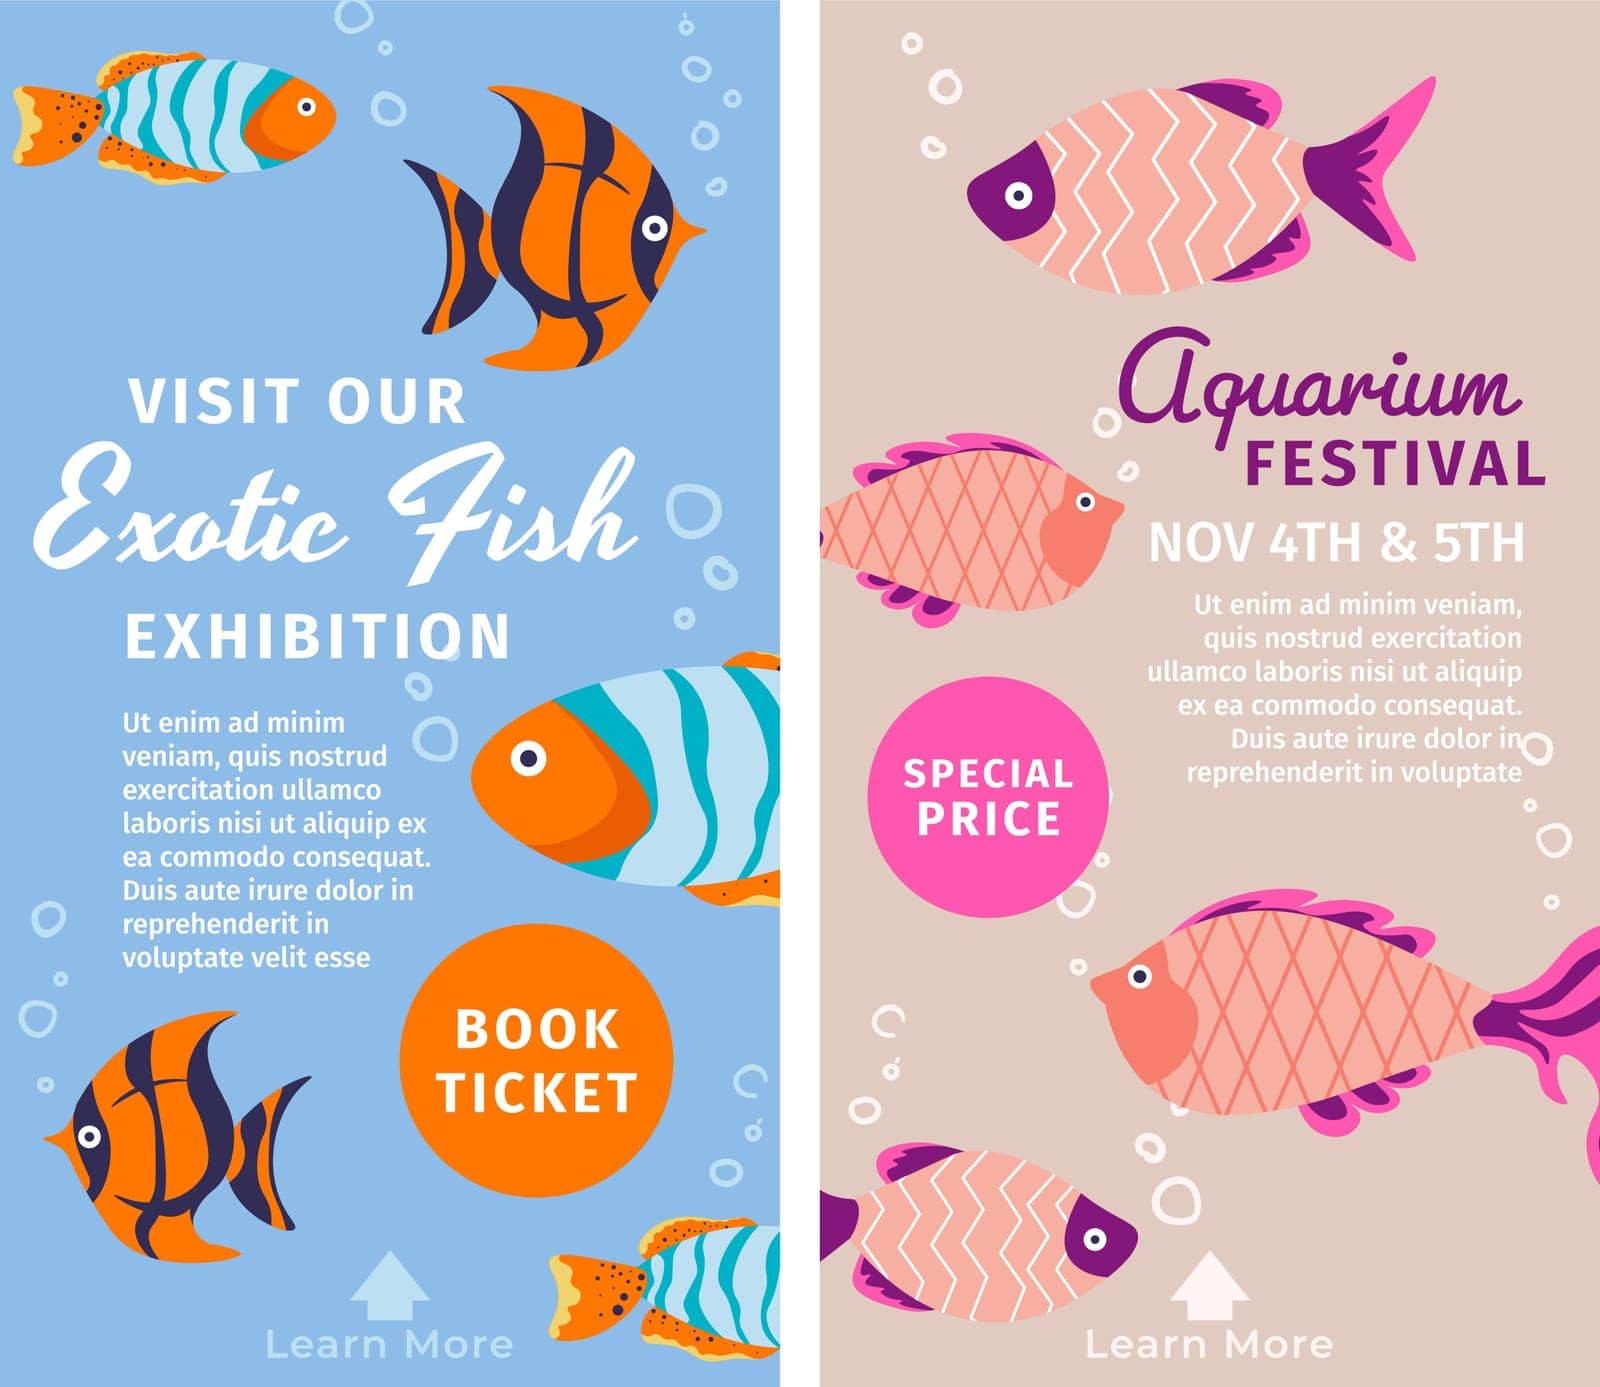 Visit exhibition of exotic fish, book tickets by Sonulkaster